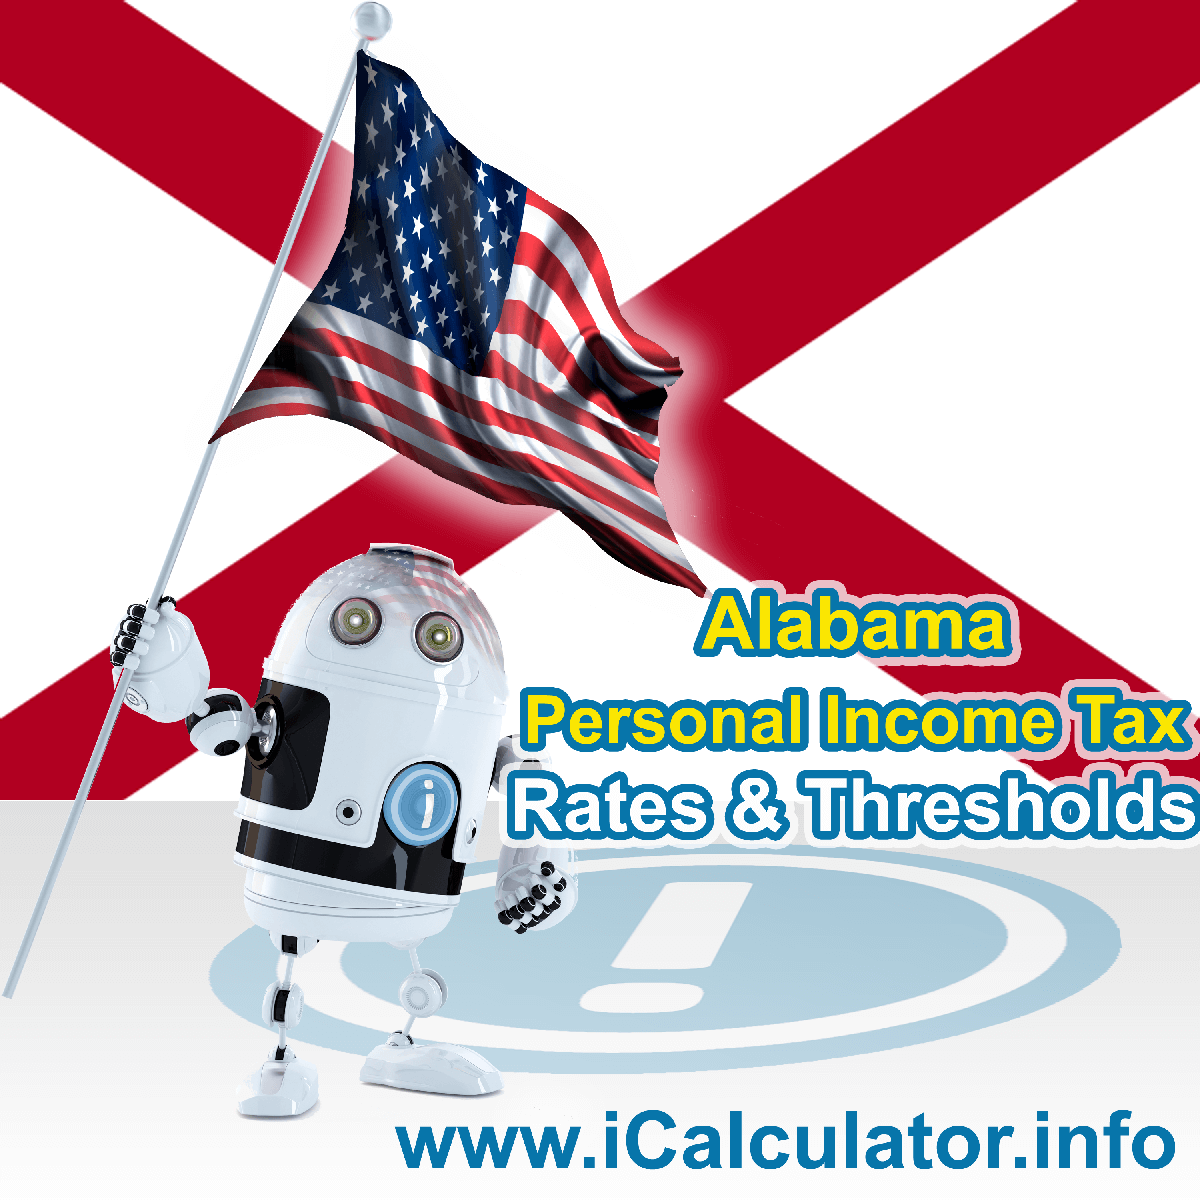 Alabama State Tax Tables 2019. This image displays details of the Alabama State Tax Tables for the 2019 tax return year which is provided in support of the 2019 US Tax Calculator